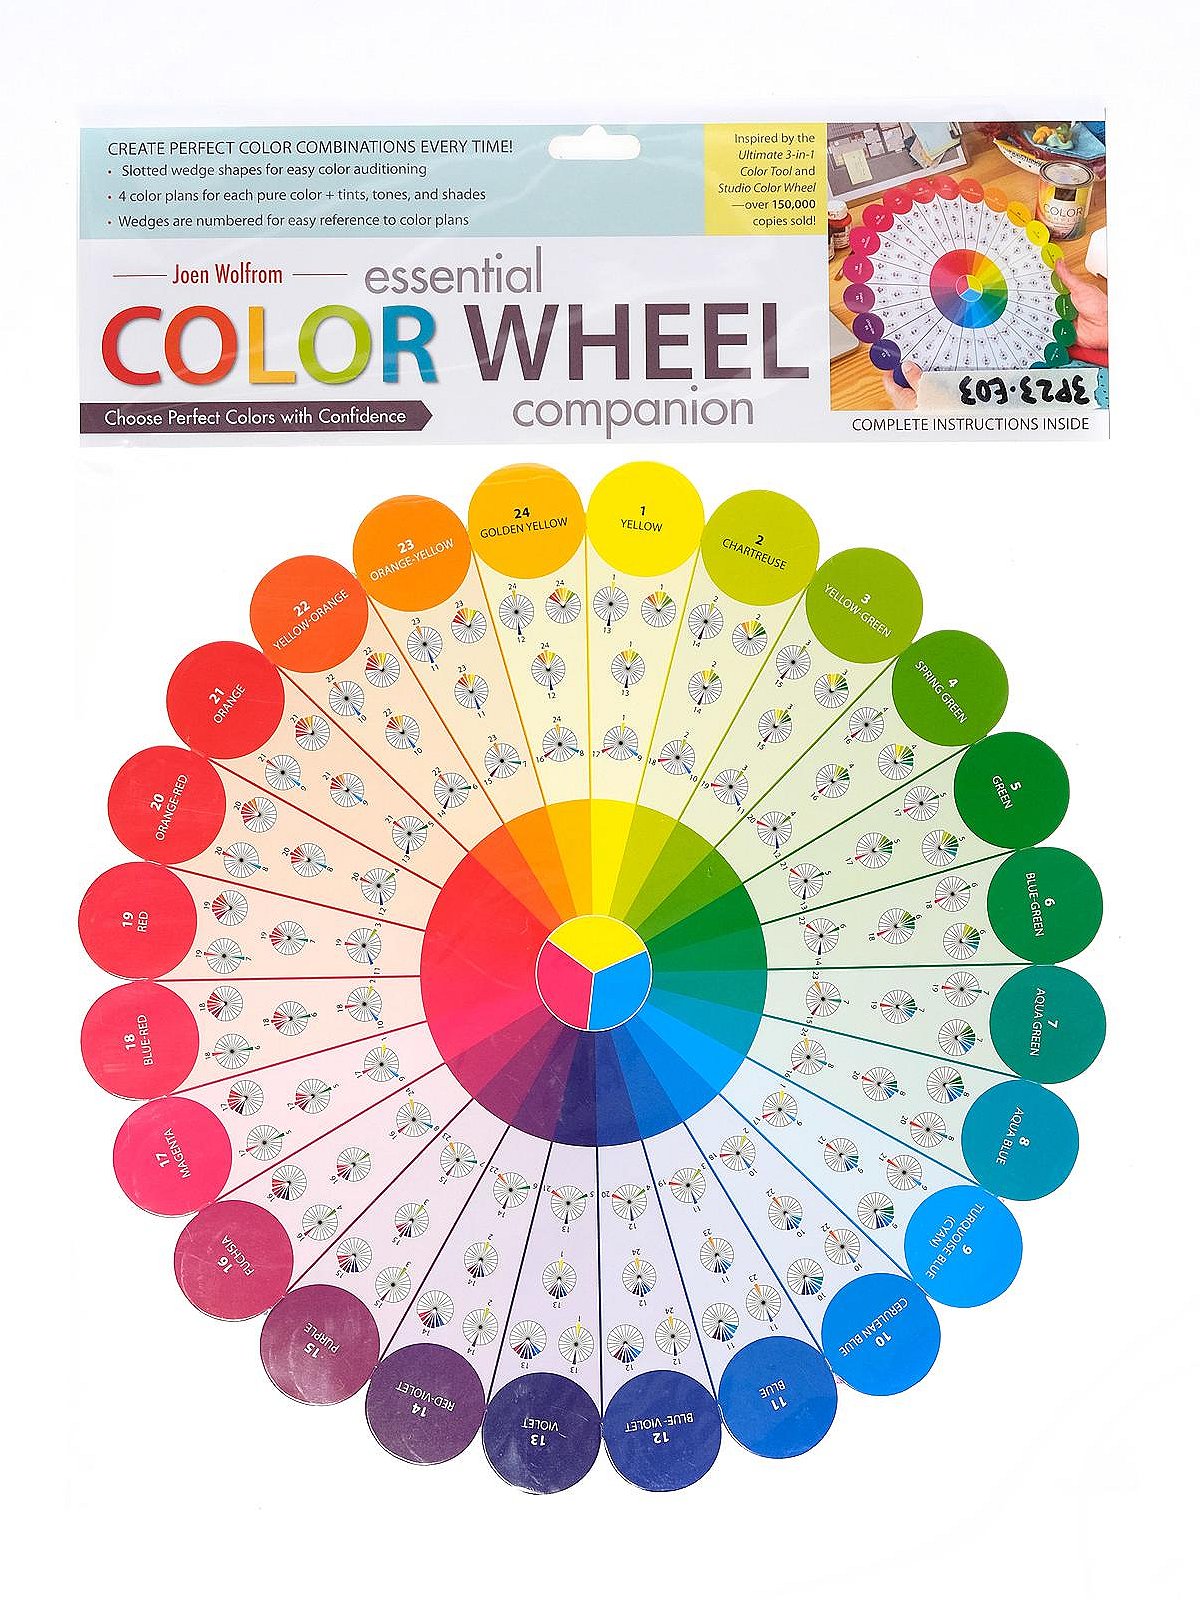 Essential Color Wheel Companion: Choose Perfect Colors With Confidence [Book]